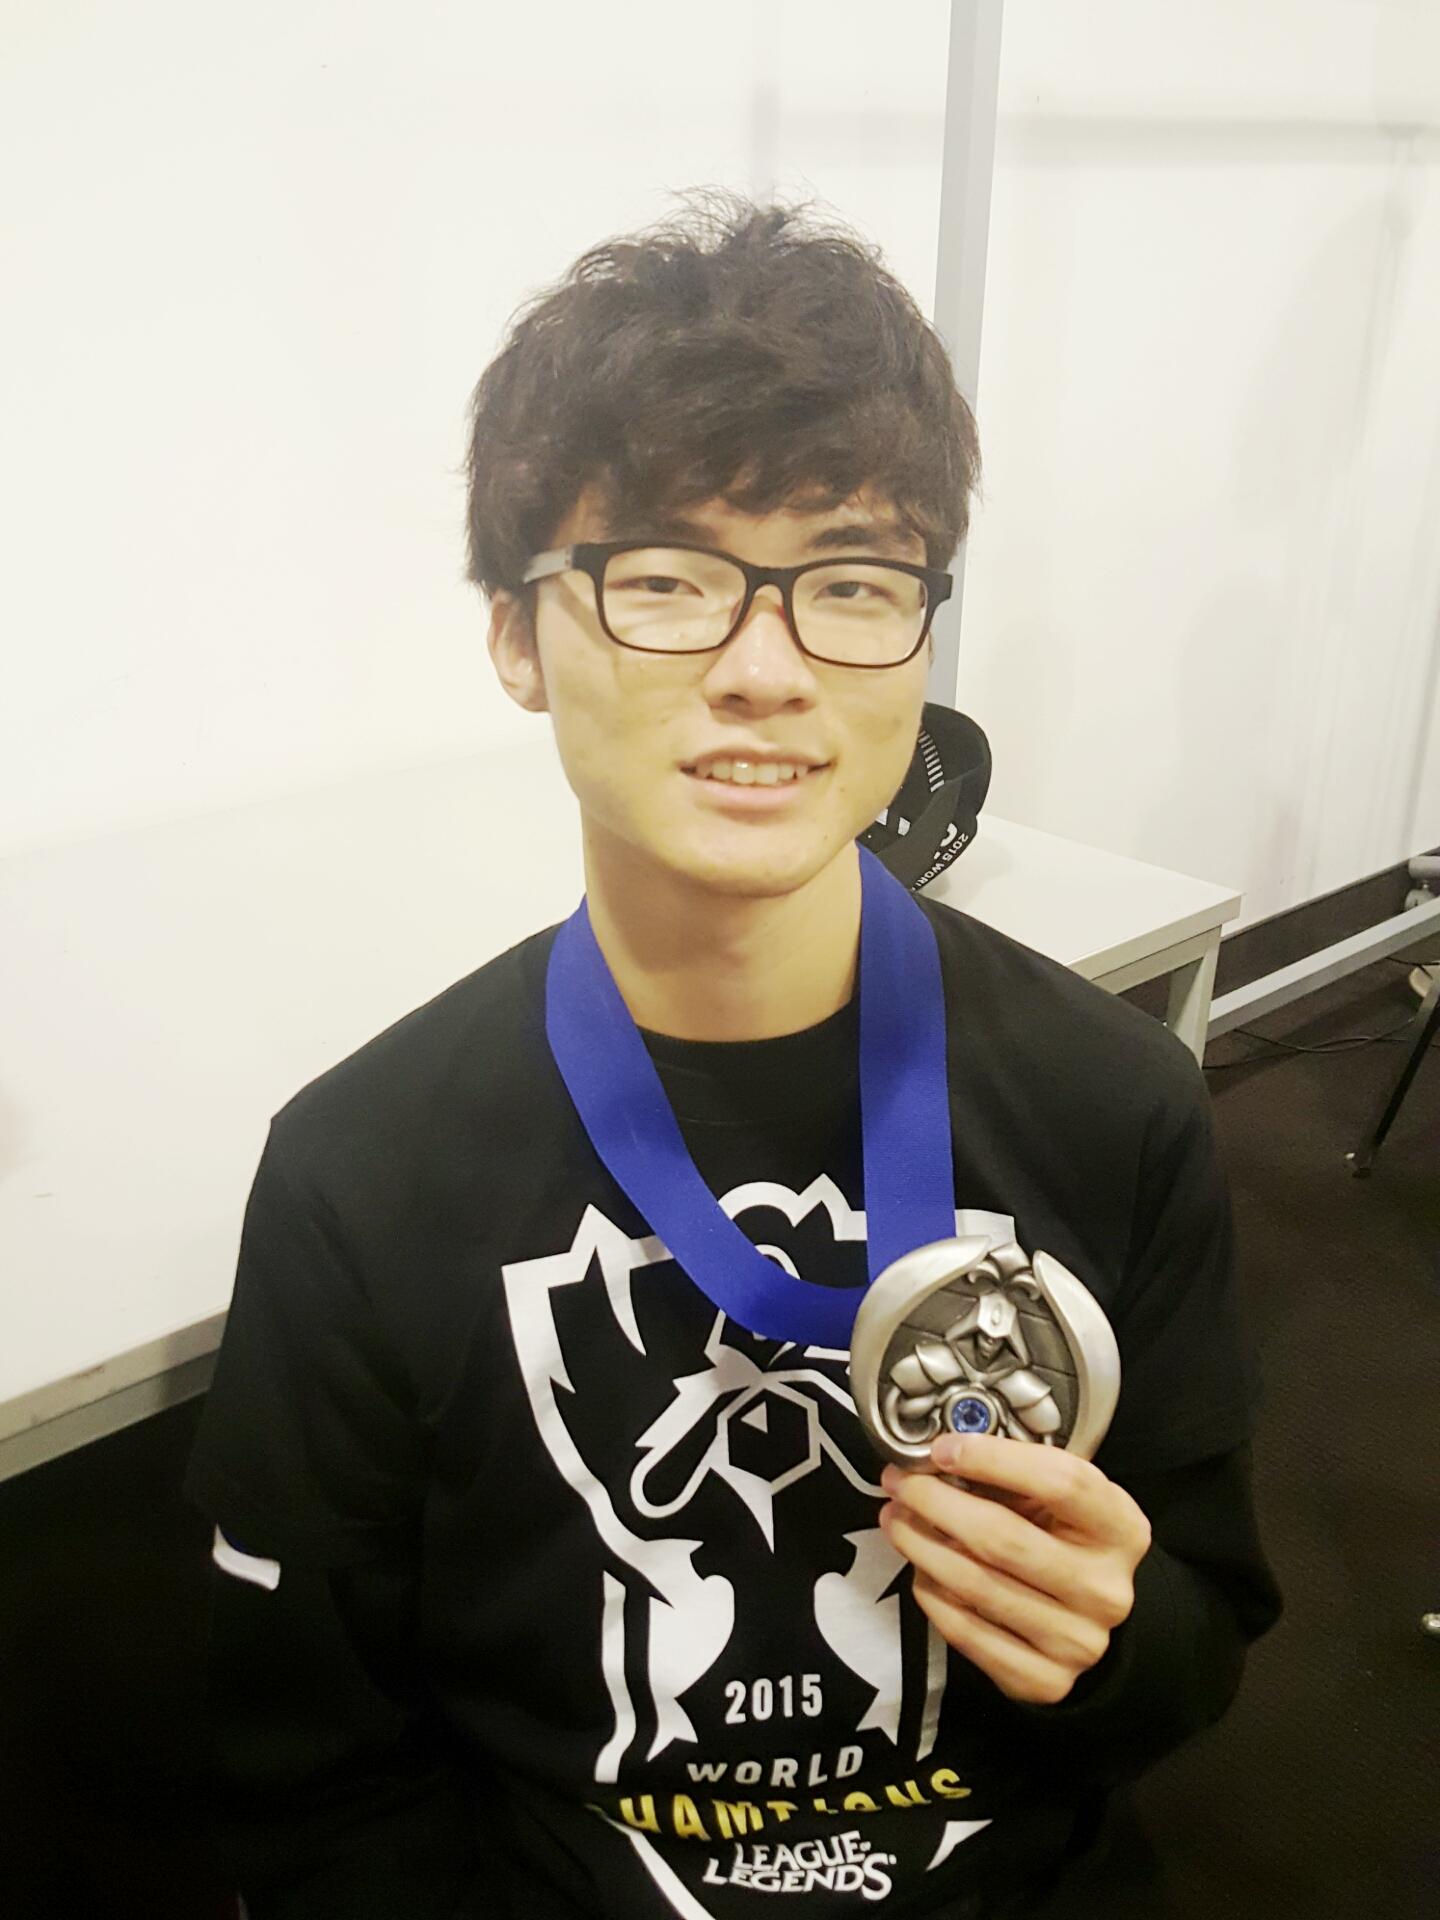 /commons/images/b/be/T1_Faker_Worlds